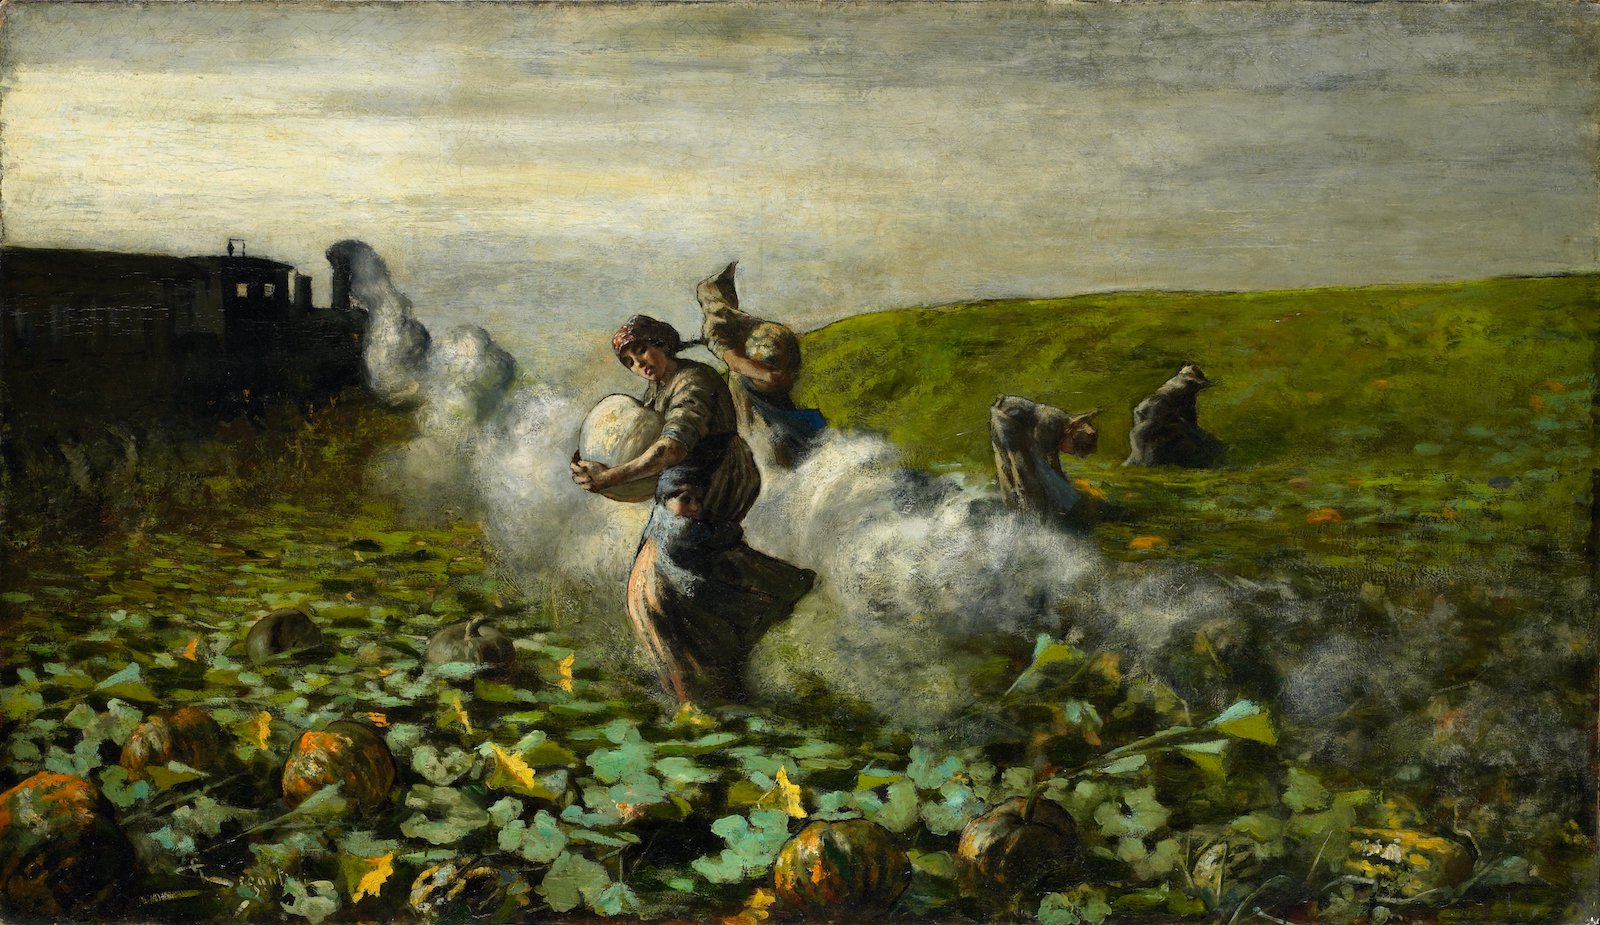 ‘The Pumpkin Harvest’ by Giovanni Segantini shows rural life being encroached upon by industrialisation, 1897. Minneapolis Institute of Art. Public Domain.